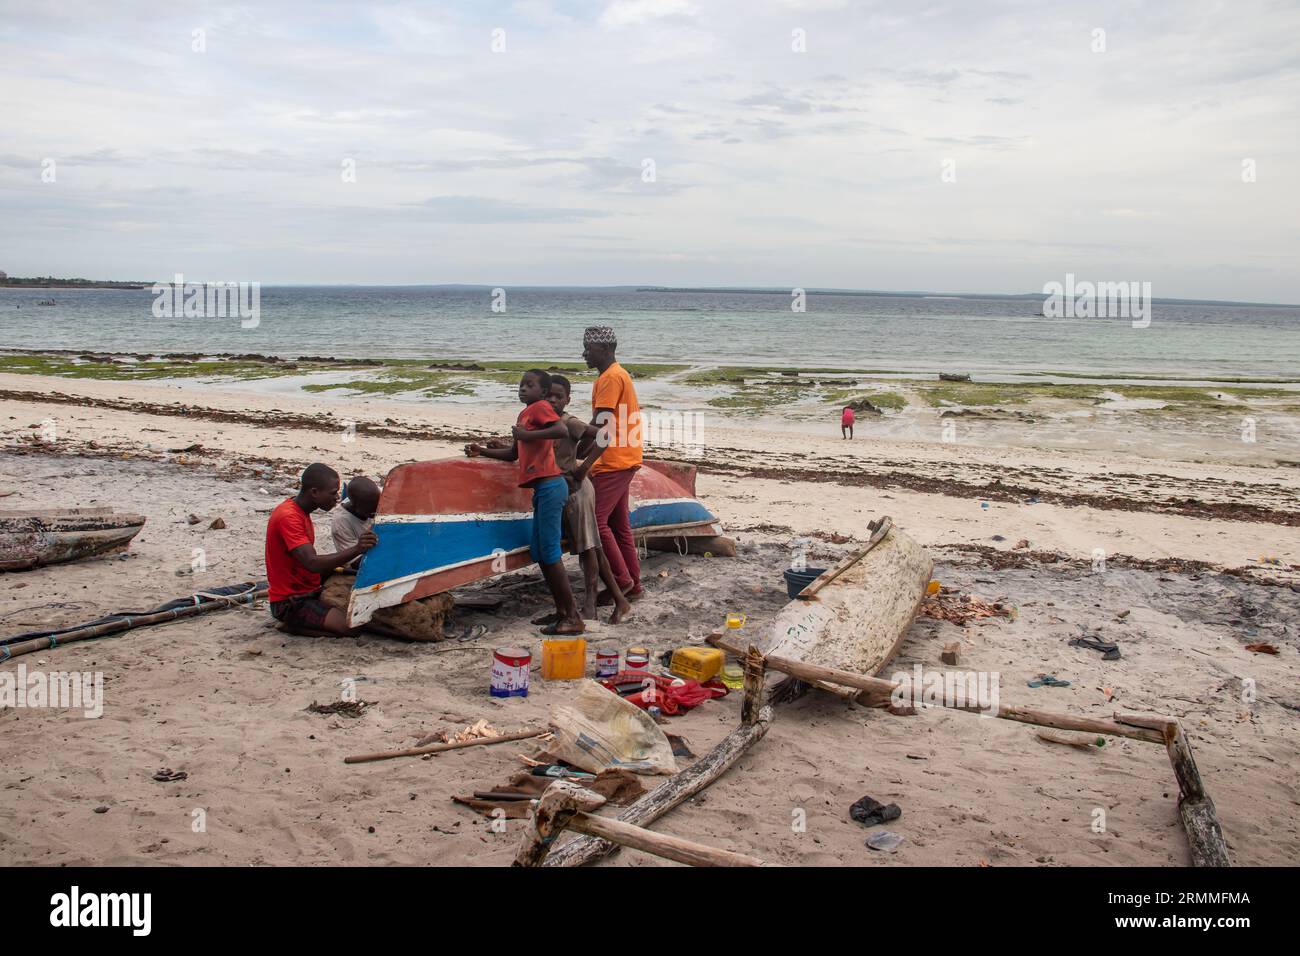 Group of African people fixing and maintaining fisherman's colorful wooden boat, at the shore of Indian Ocean. Bunch of curious kids wondering around Stock Photo